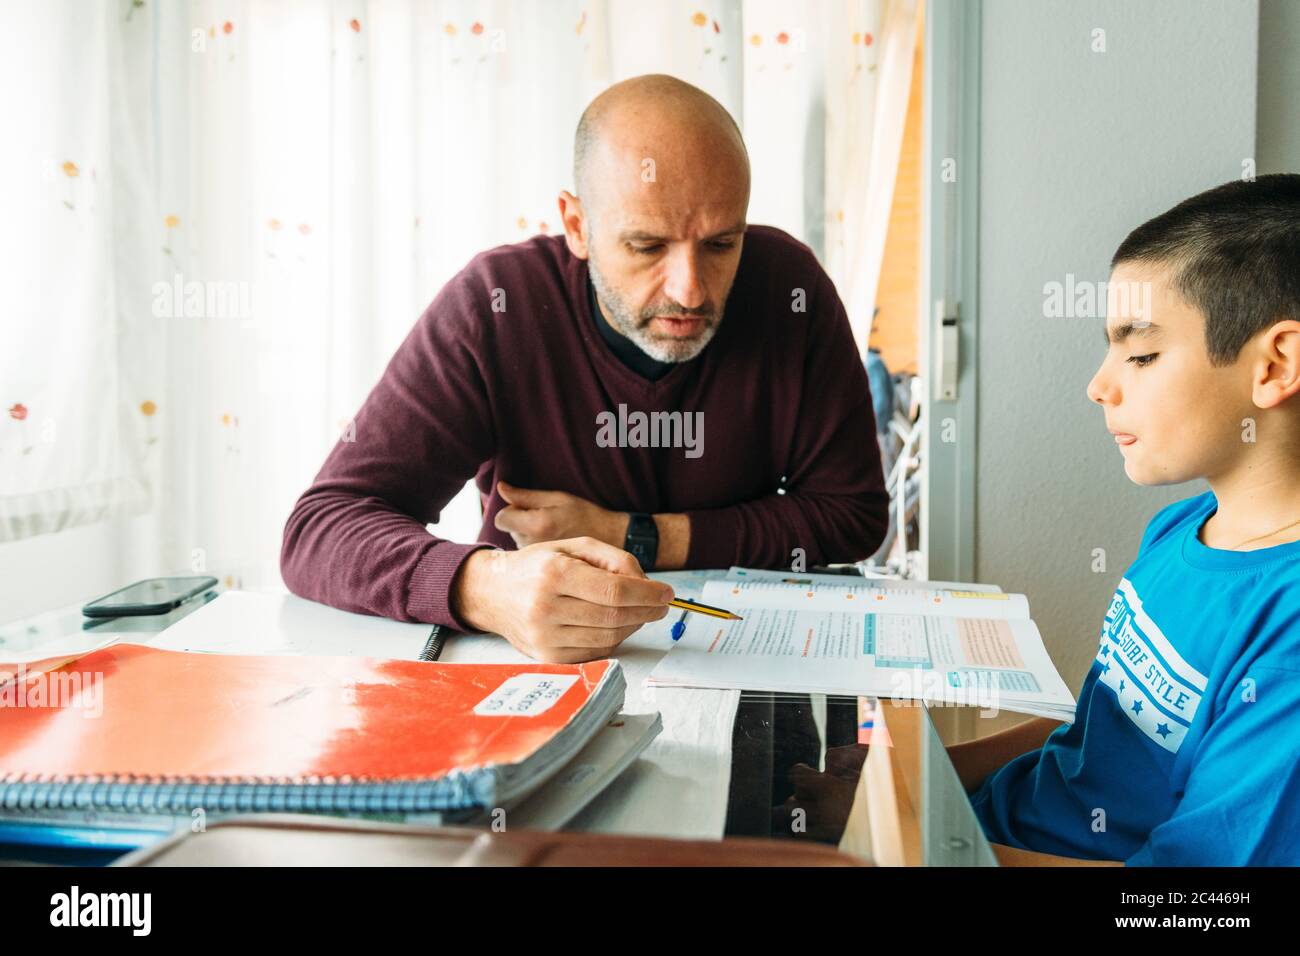 Confident father teaching son while sitting at desk during homeschooling Stock Photo